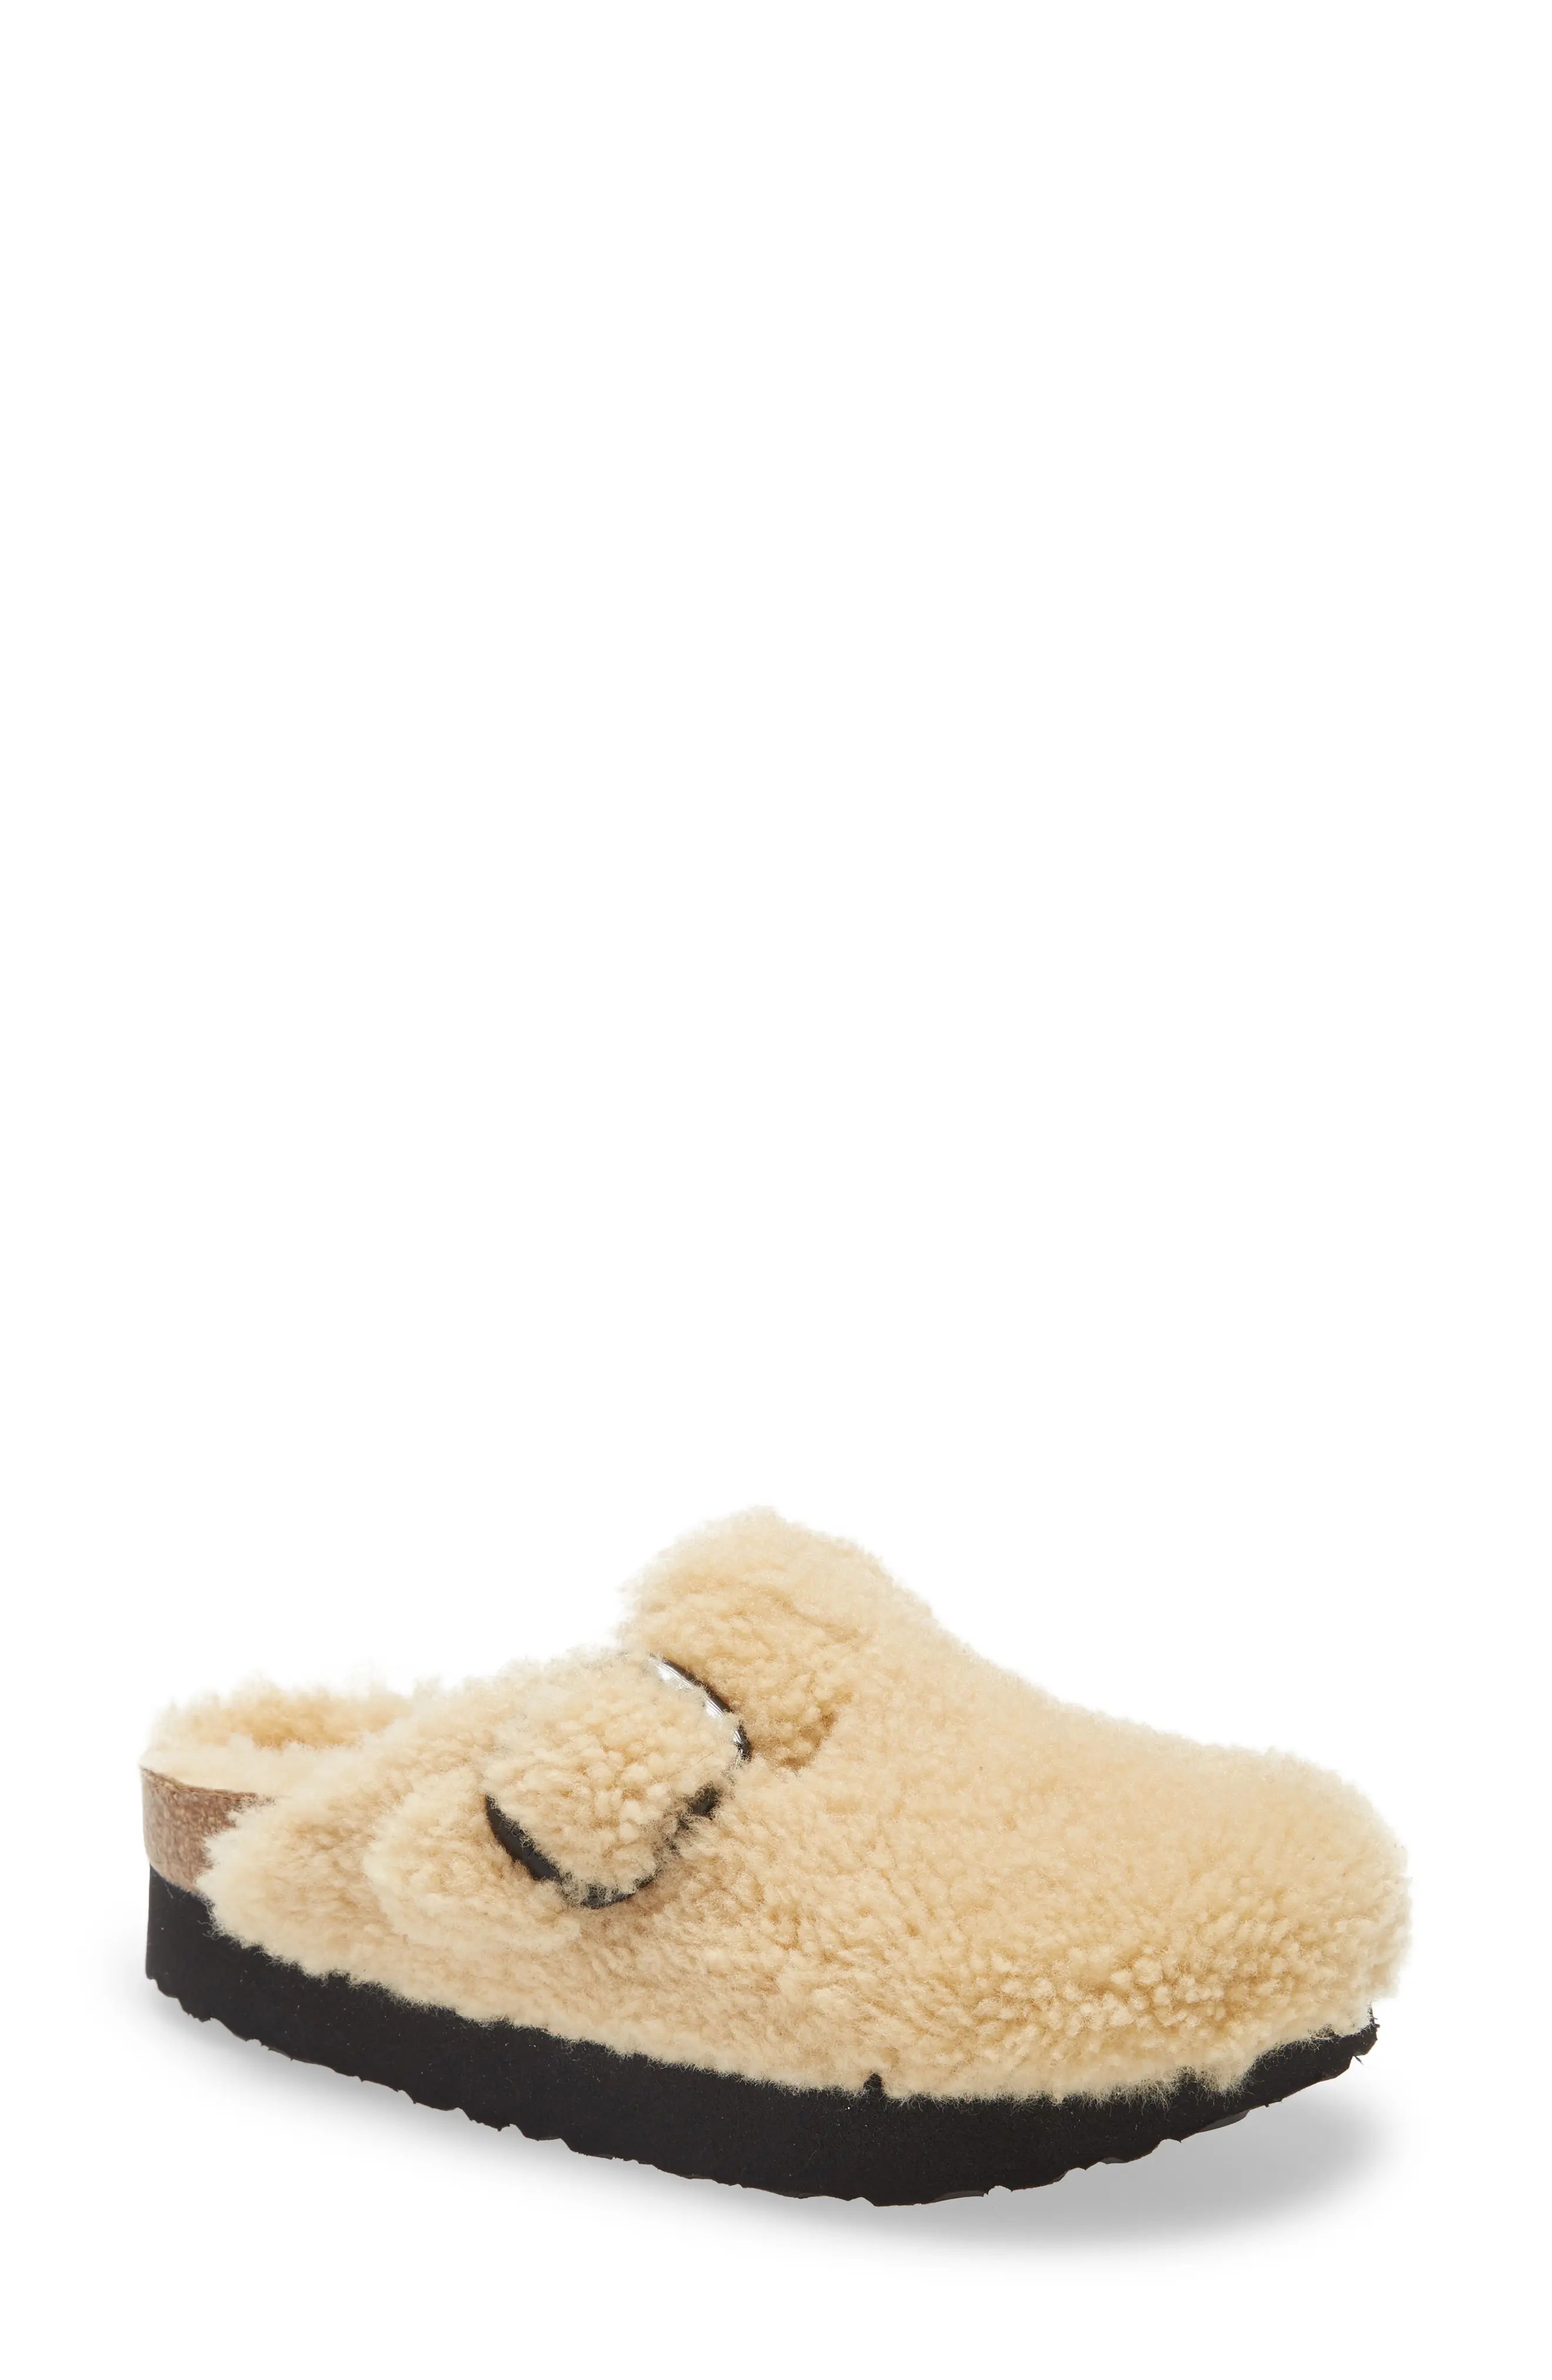 Papillio by Birkenstock Boston Big Buckle Genuine Shearling Clog in Eggshell at Nordstrom, Size 5-5. | Nordstrom